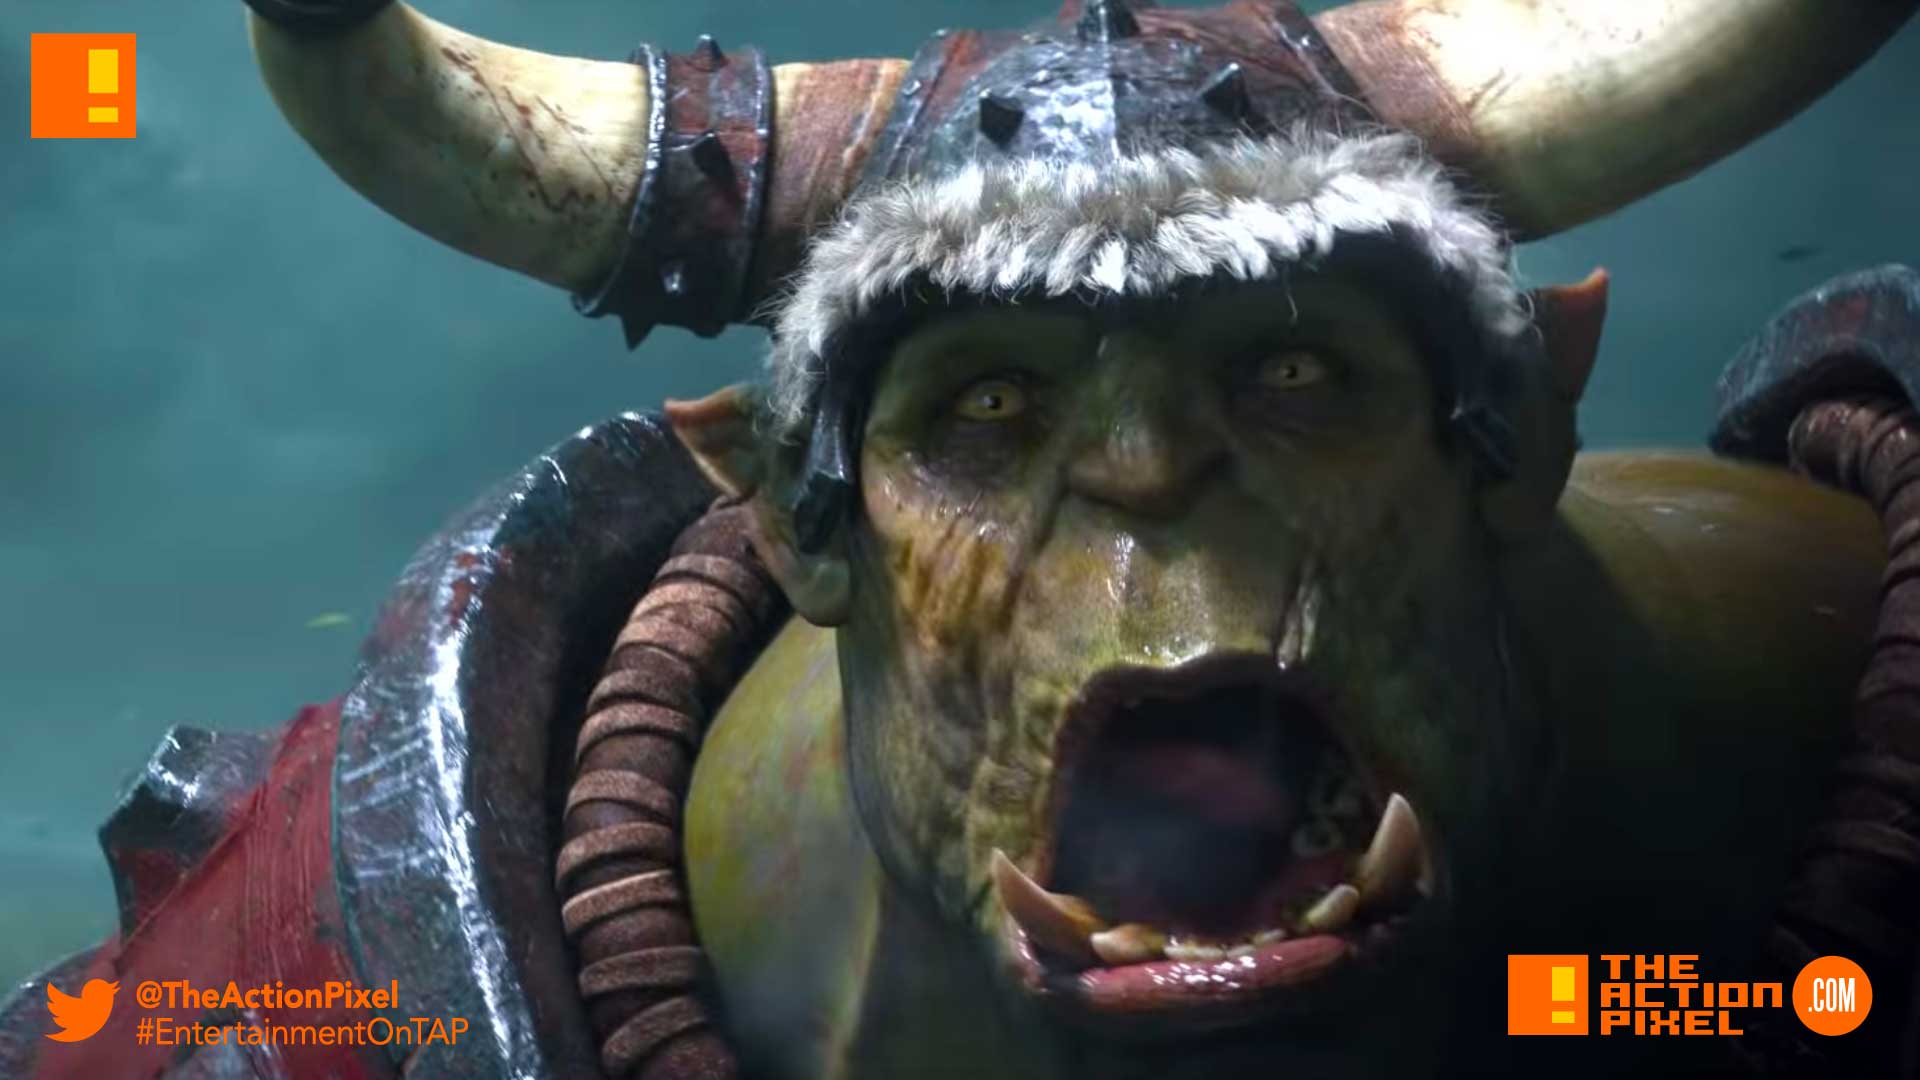 warcraft iii: reforged,warcraft, blizzcon, blizzard entertainment , warcraft iii, warcraft, the action pixel, cinematic trailer, entertainment on tap, the action pixel